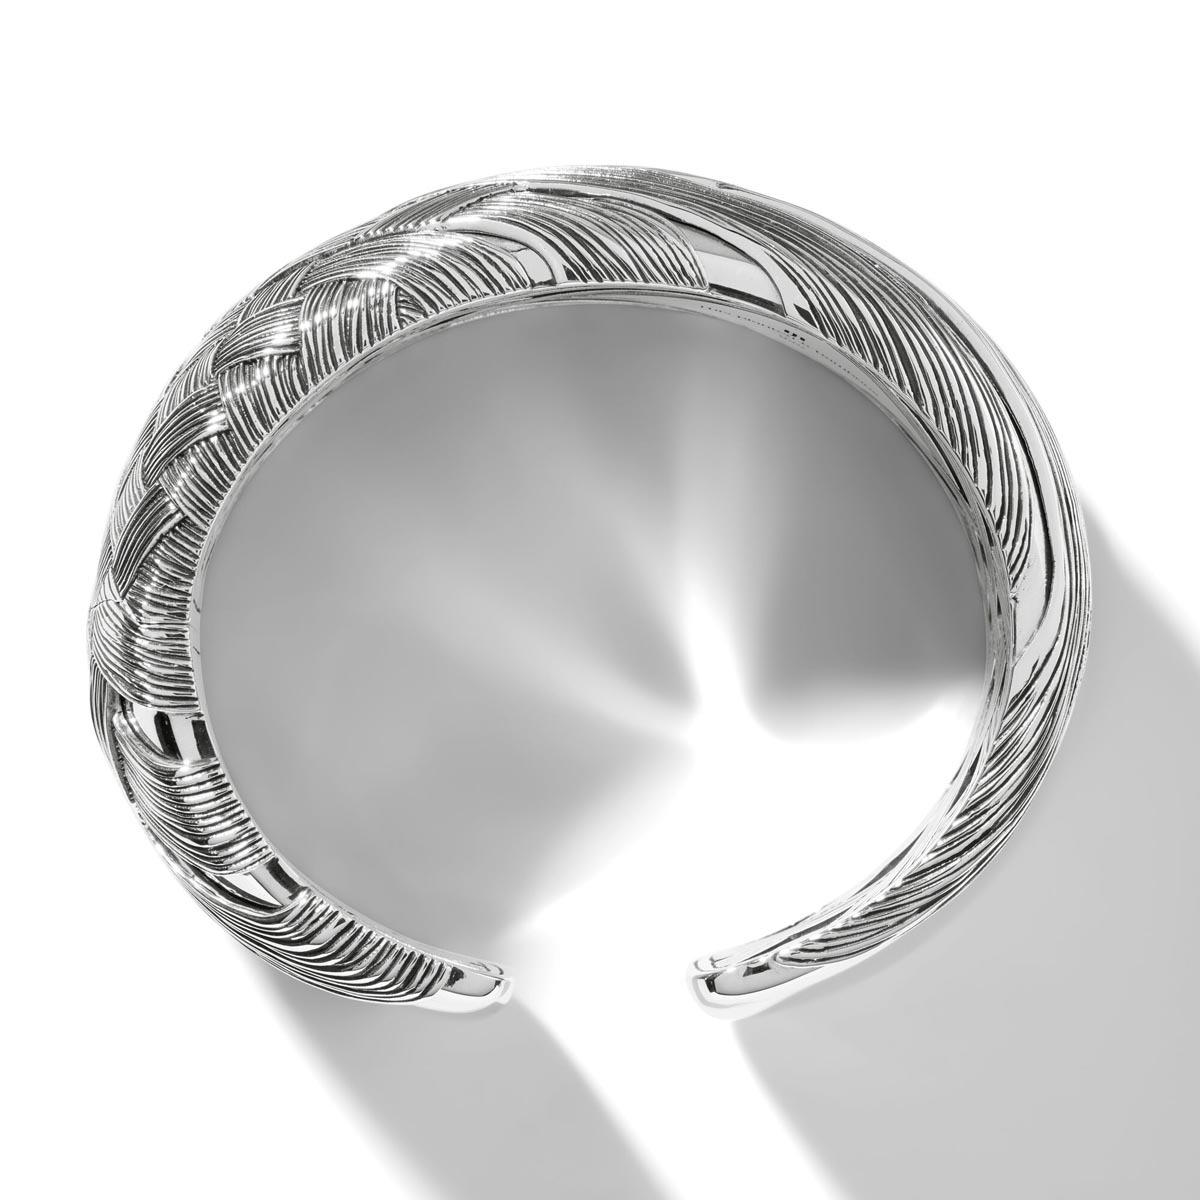 John Hardy Bamboo Collection Woven Cuff Bracelet in Sterling Silver